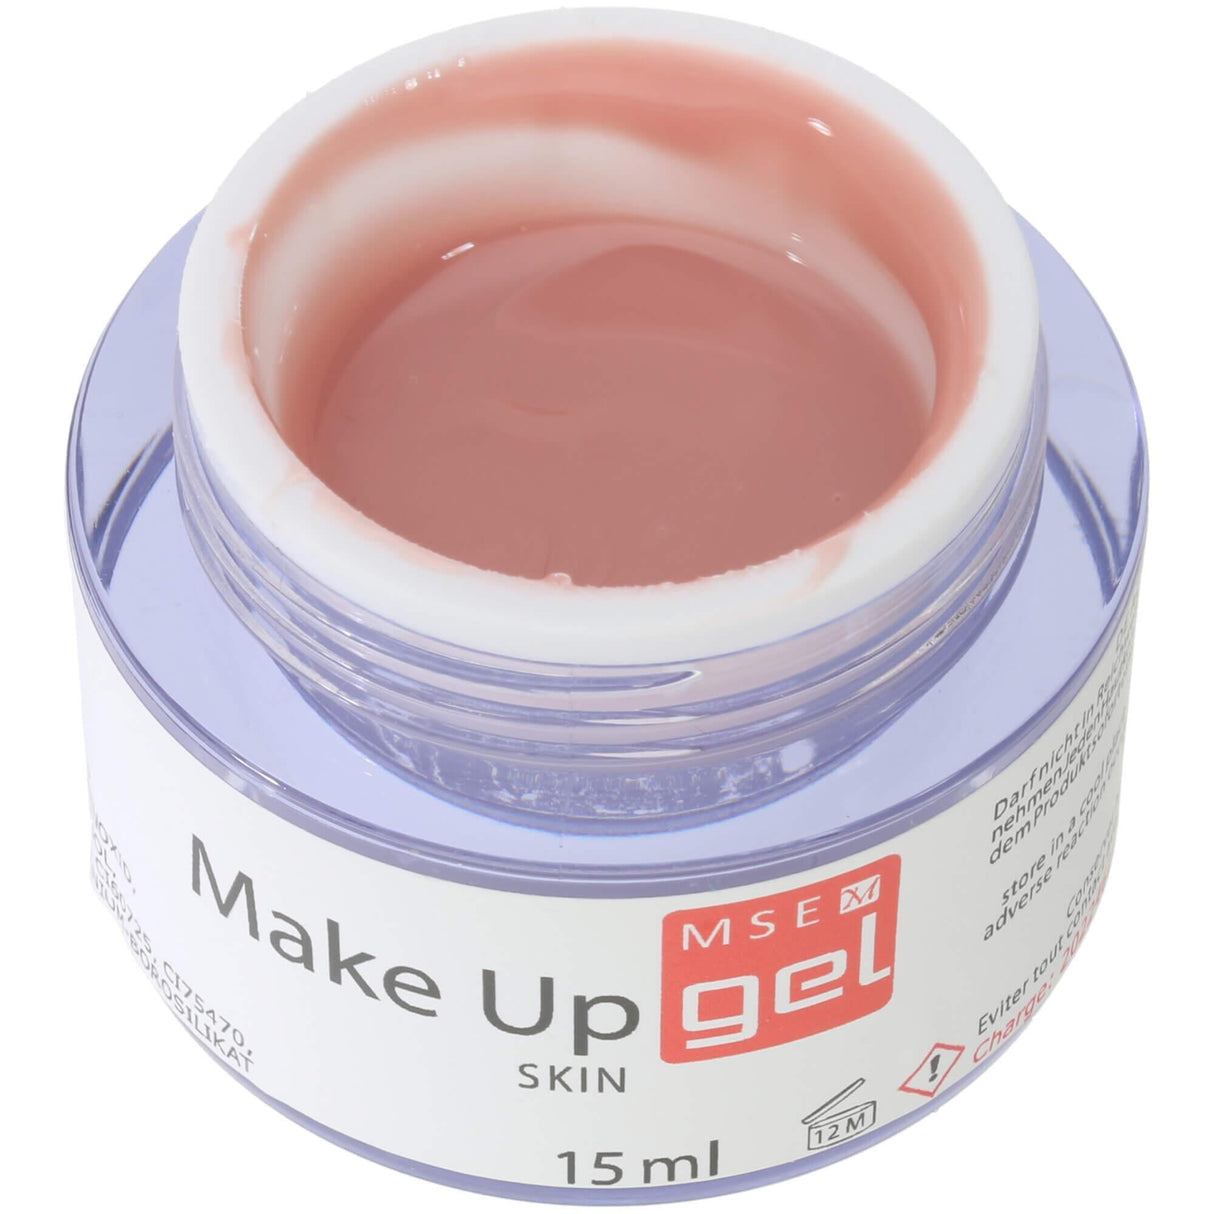 MSE Gel 210: Make Up Gel Haut 15ml - MSE - The Beauty Company